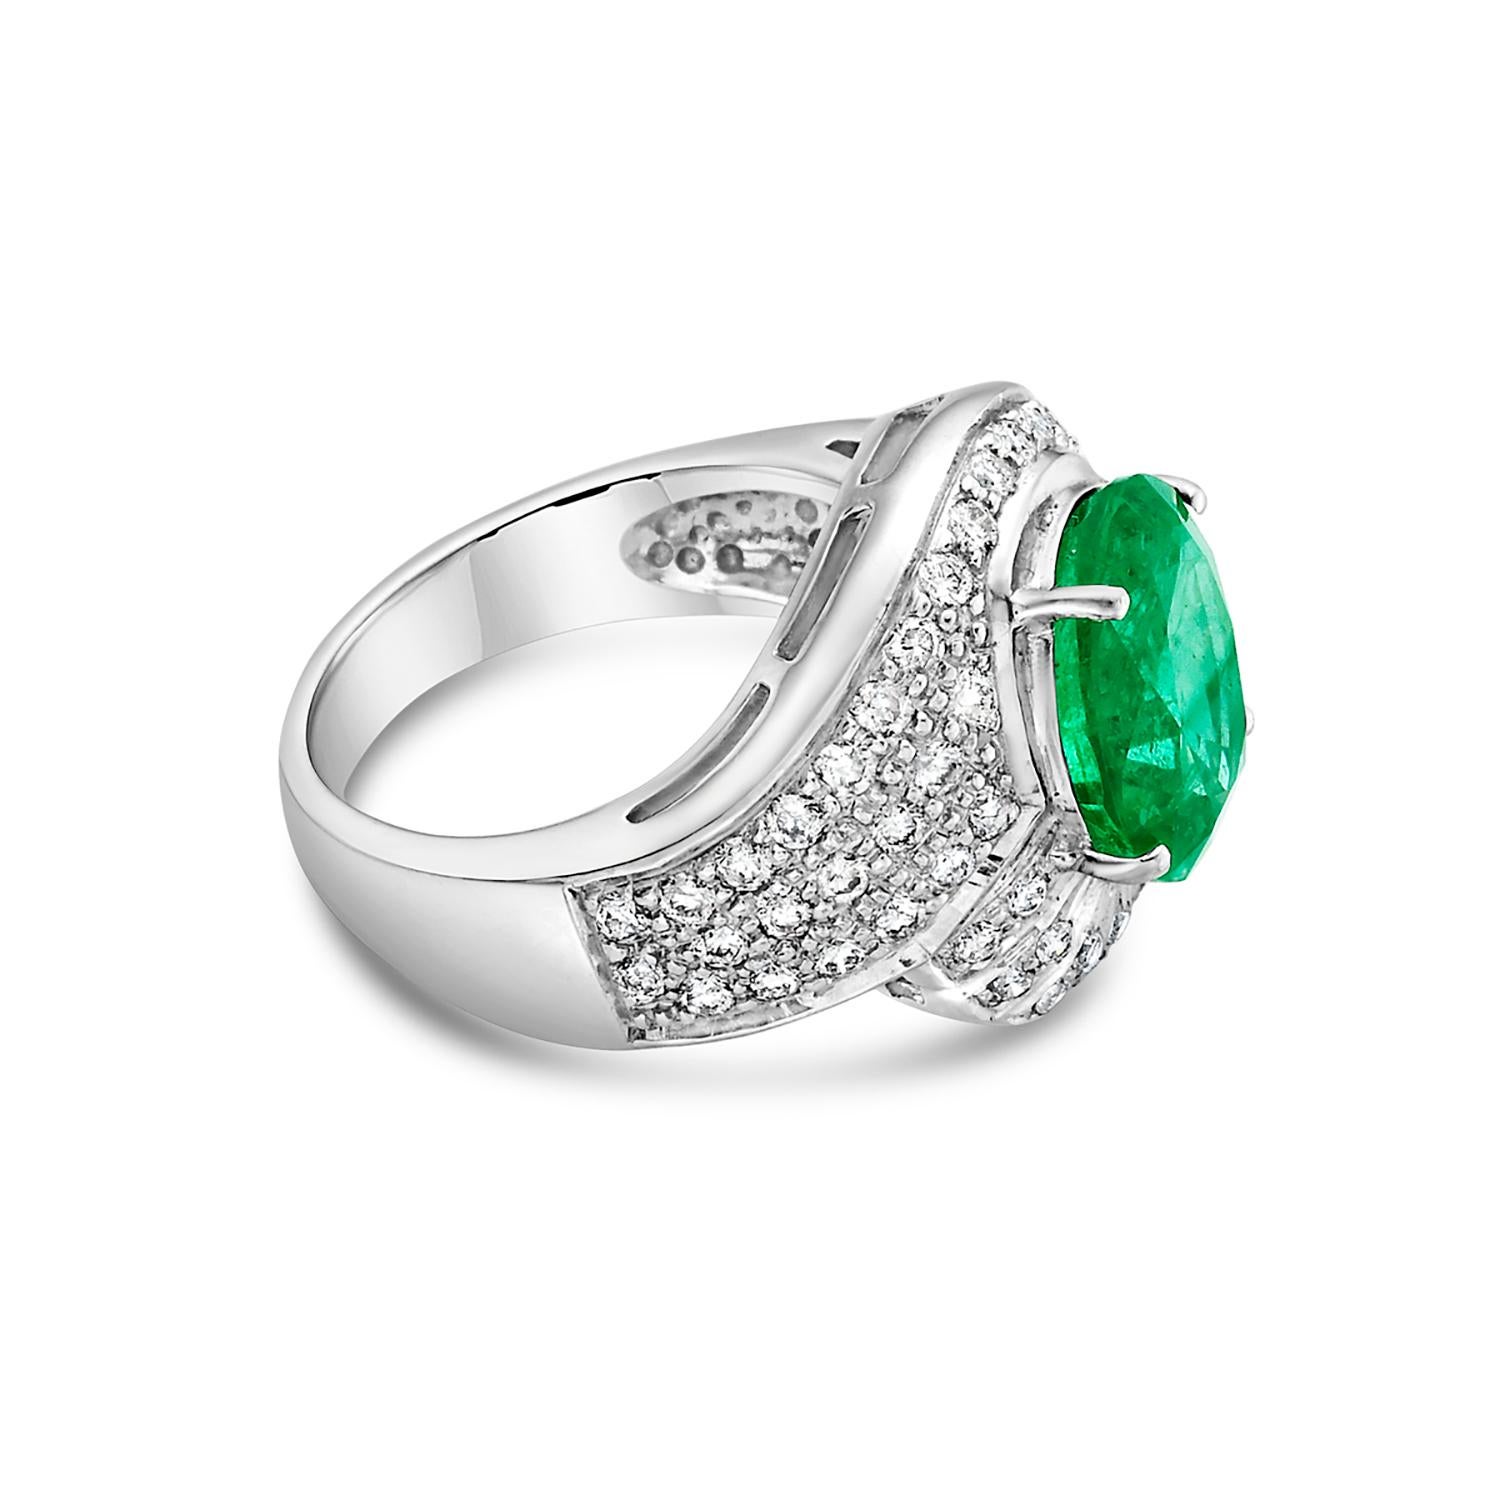 Mixed Cut Oval Shaped Zambian Emerald Cocktail Ring with Pave VS Diamond In 18k White Gold For Sale